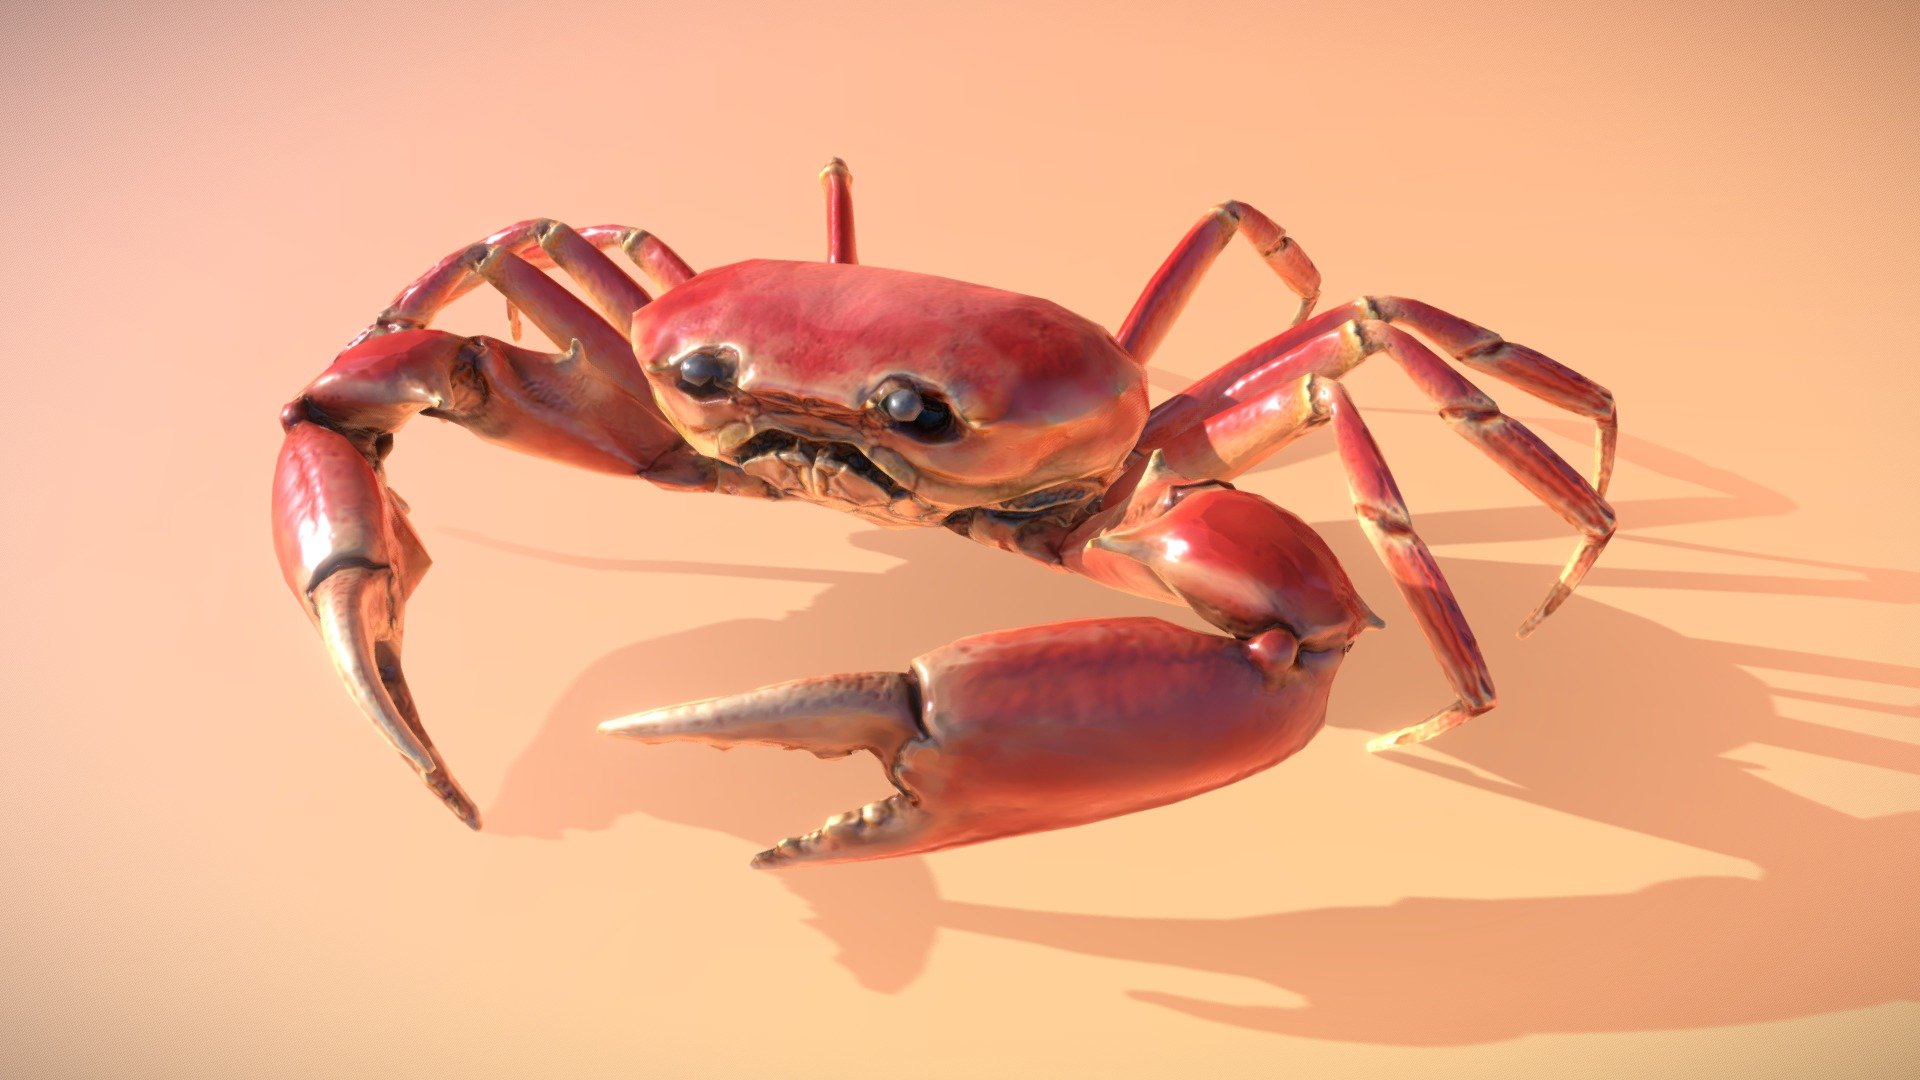 Crab creature made for the VR game in development, called Shorecut - Crab - 3D model by madseb 3d model